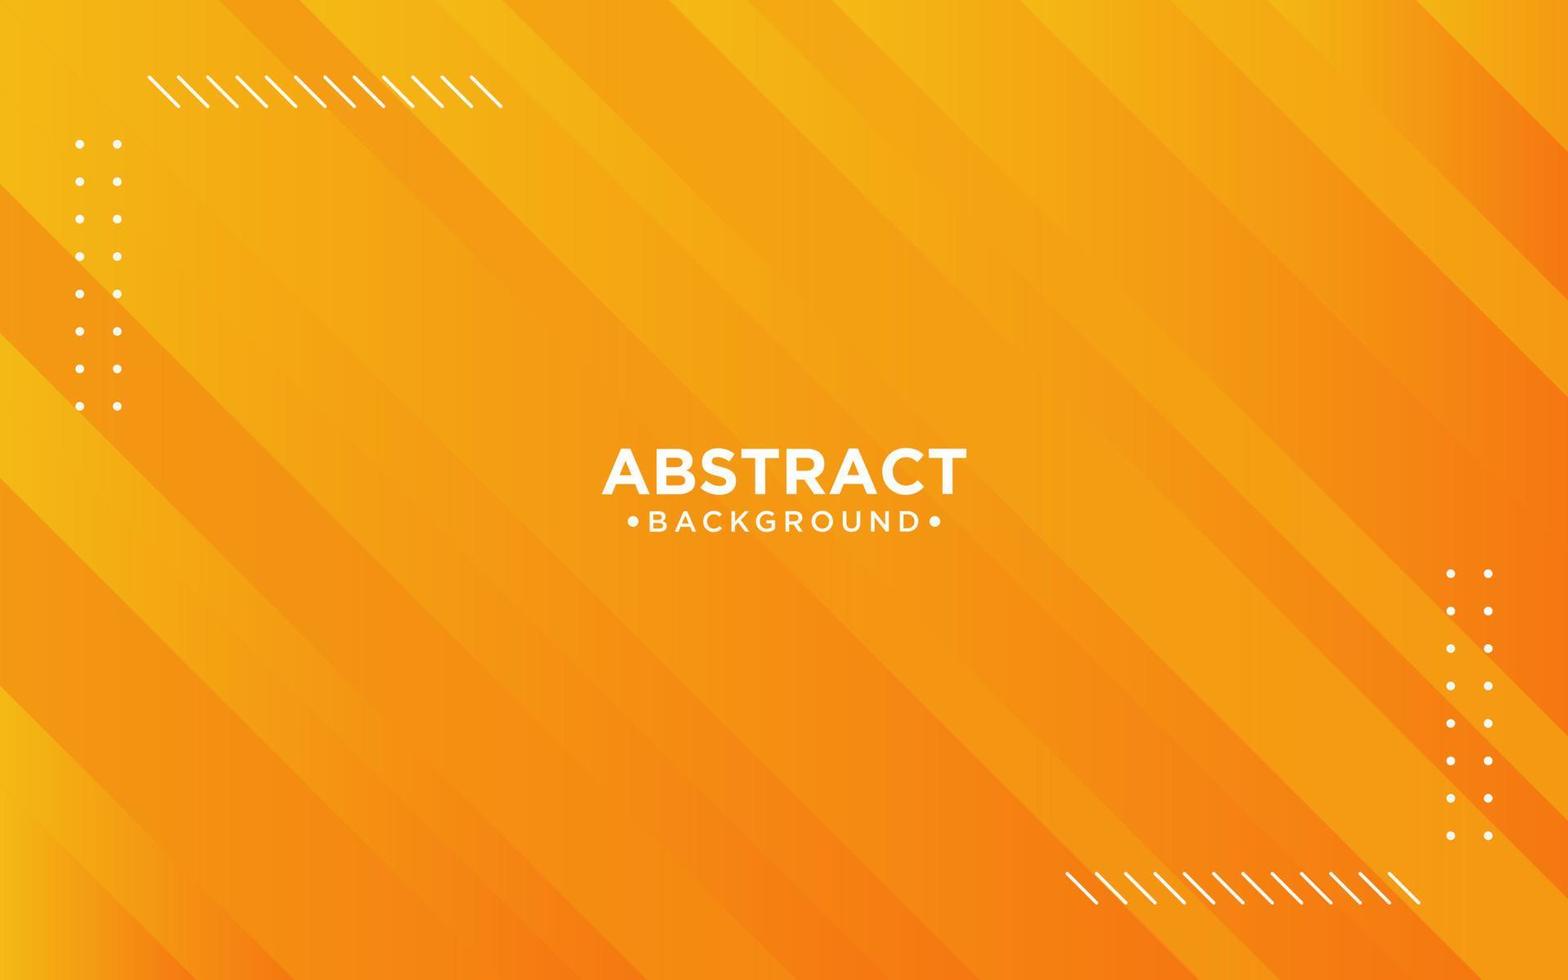 Abstract Yellow and Orange Colored Background with Diagonal Stripes. Vector Geometric Minimal Pattern.